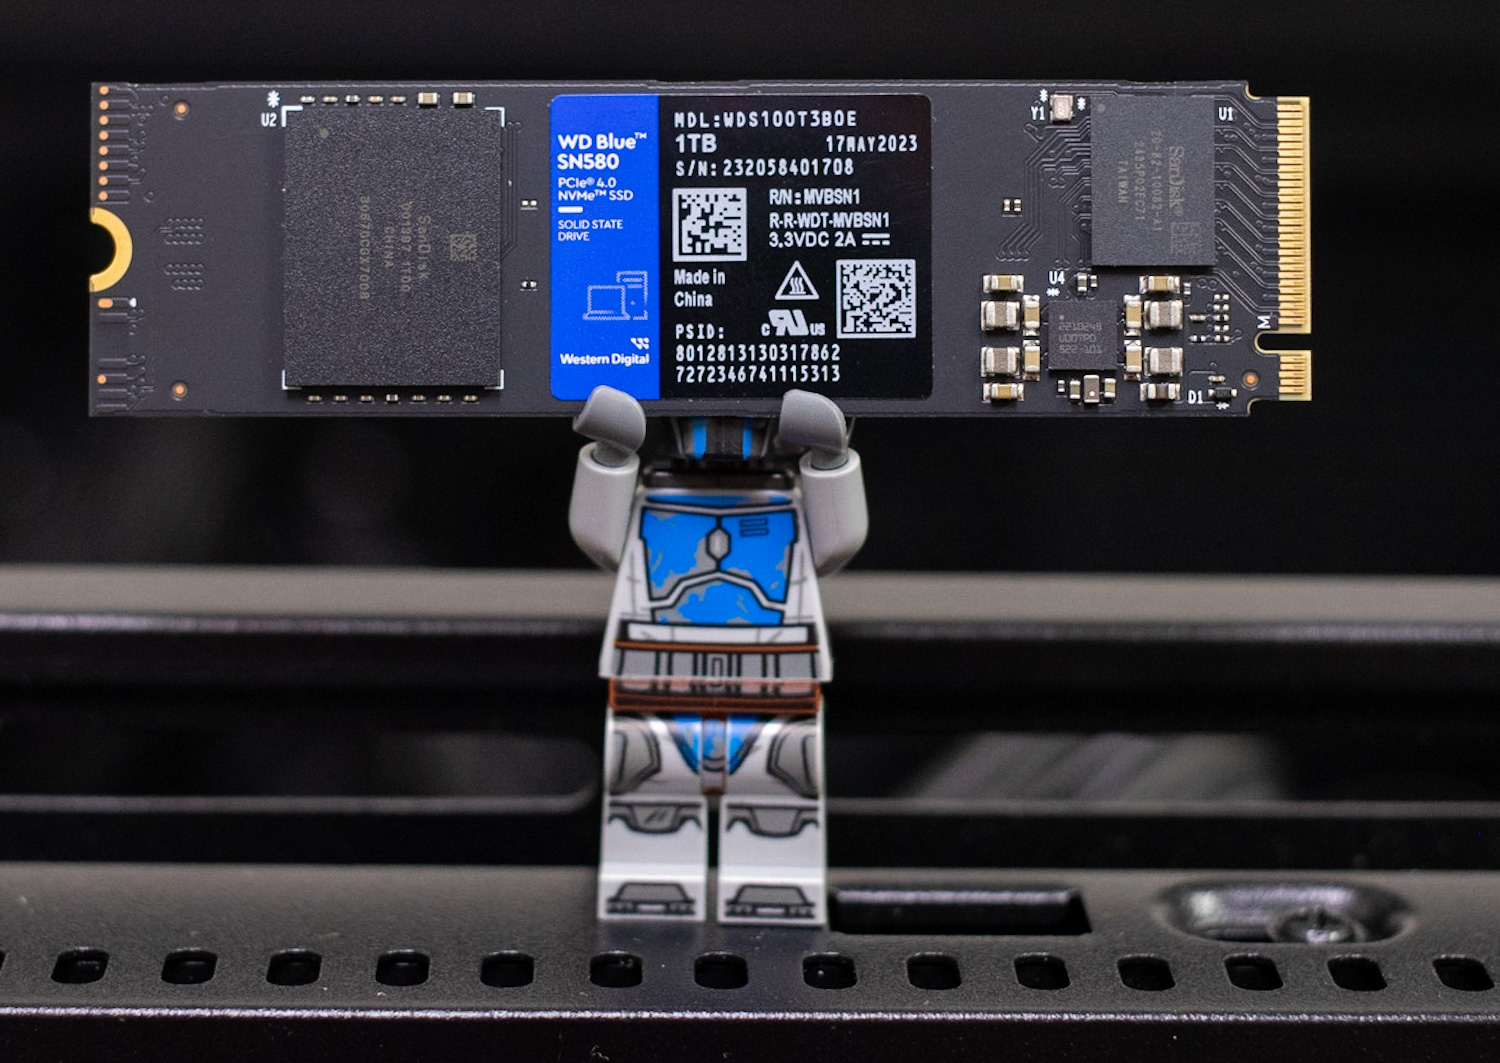 WD Blue SN580 hero with lego minifig